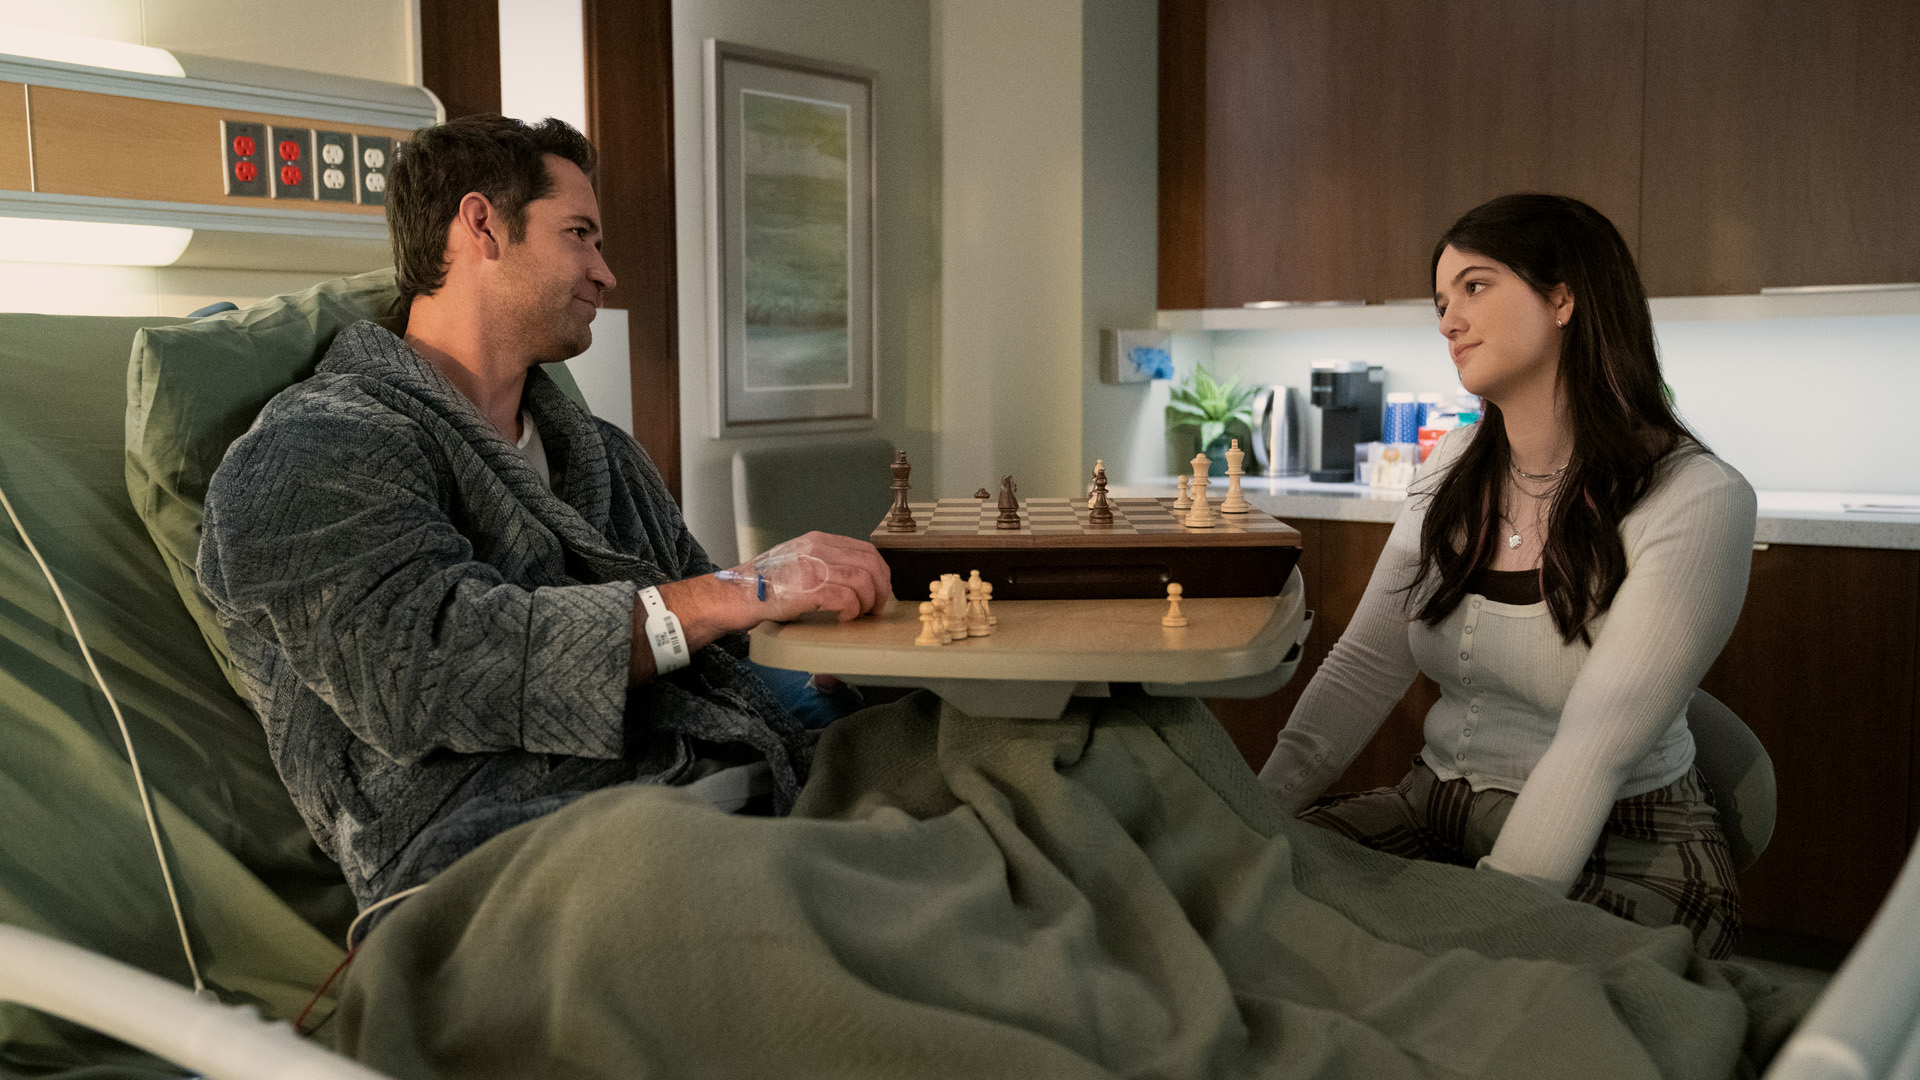 Hayley visits Mickey in his hospital bed in The Lincoln Lawyer season 2